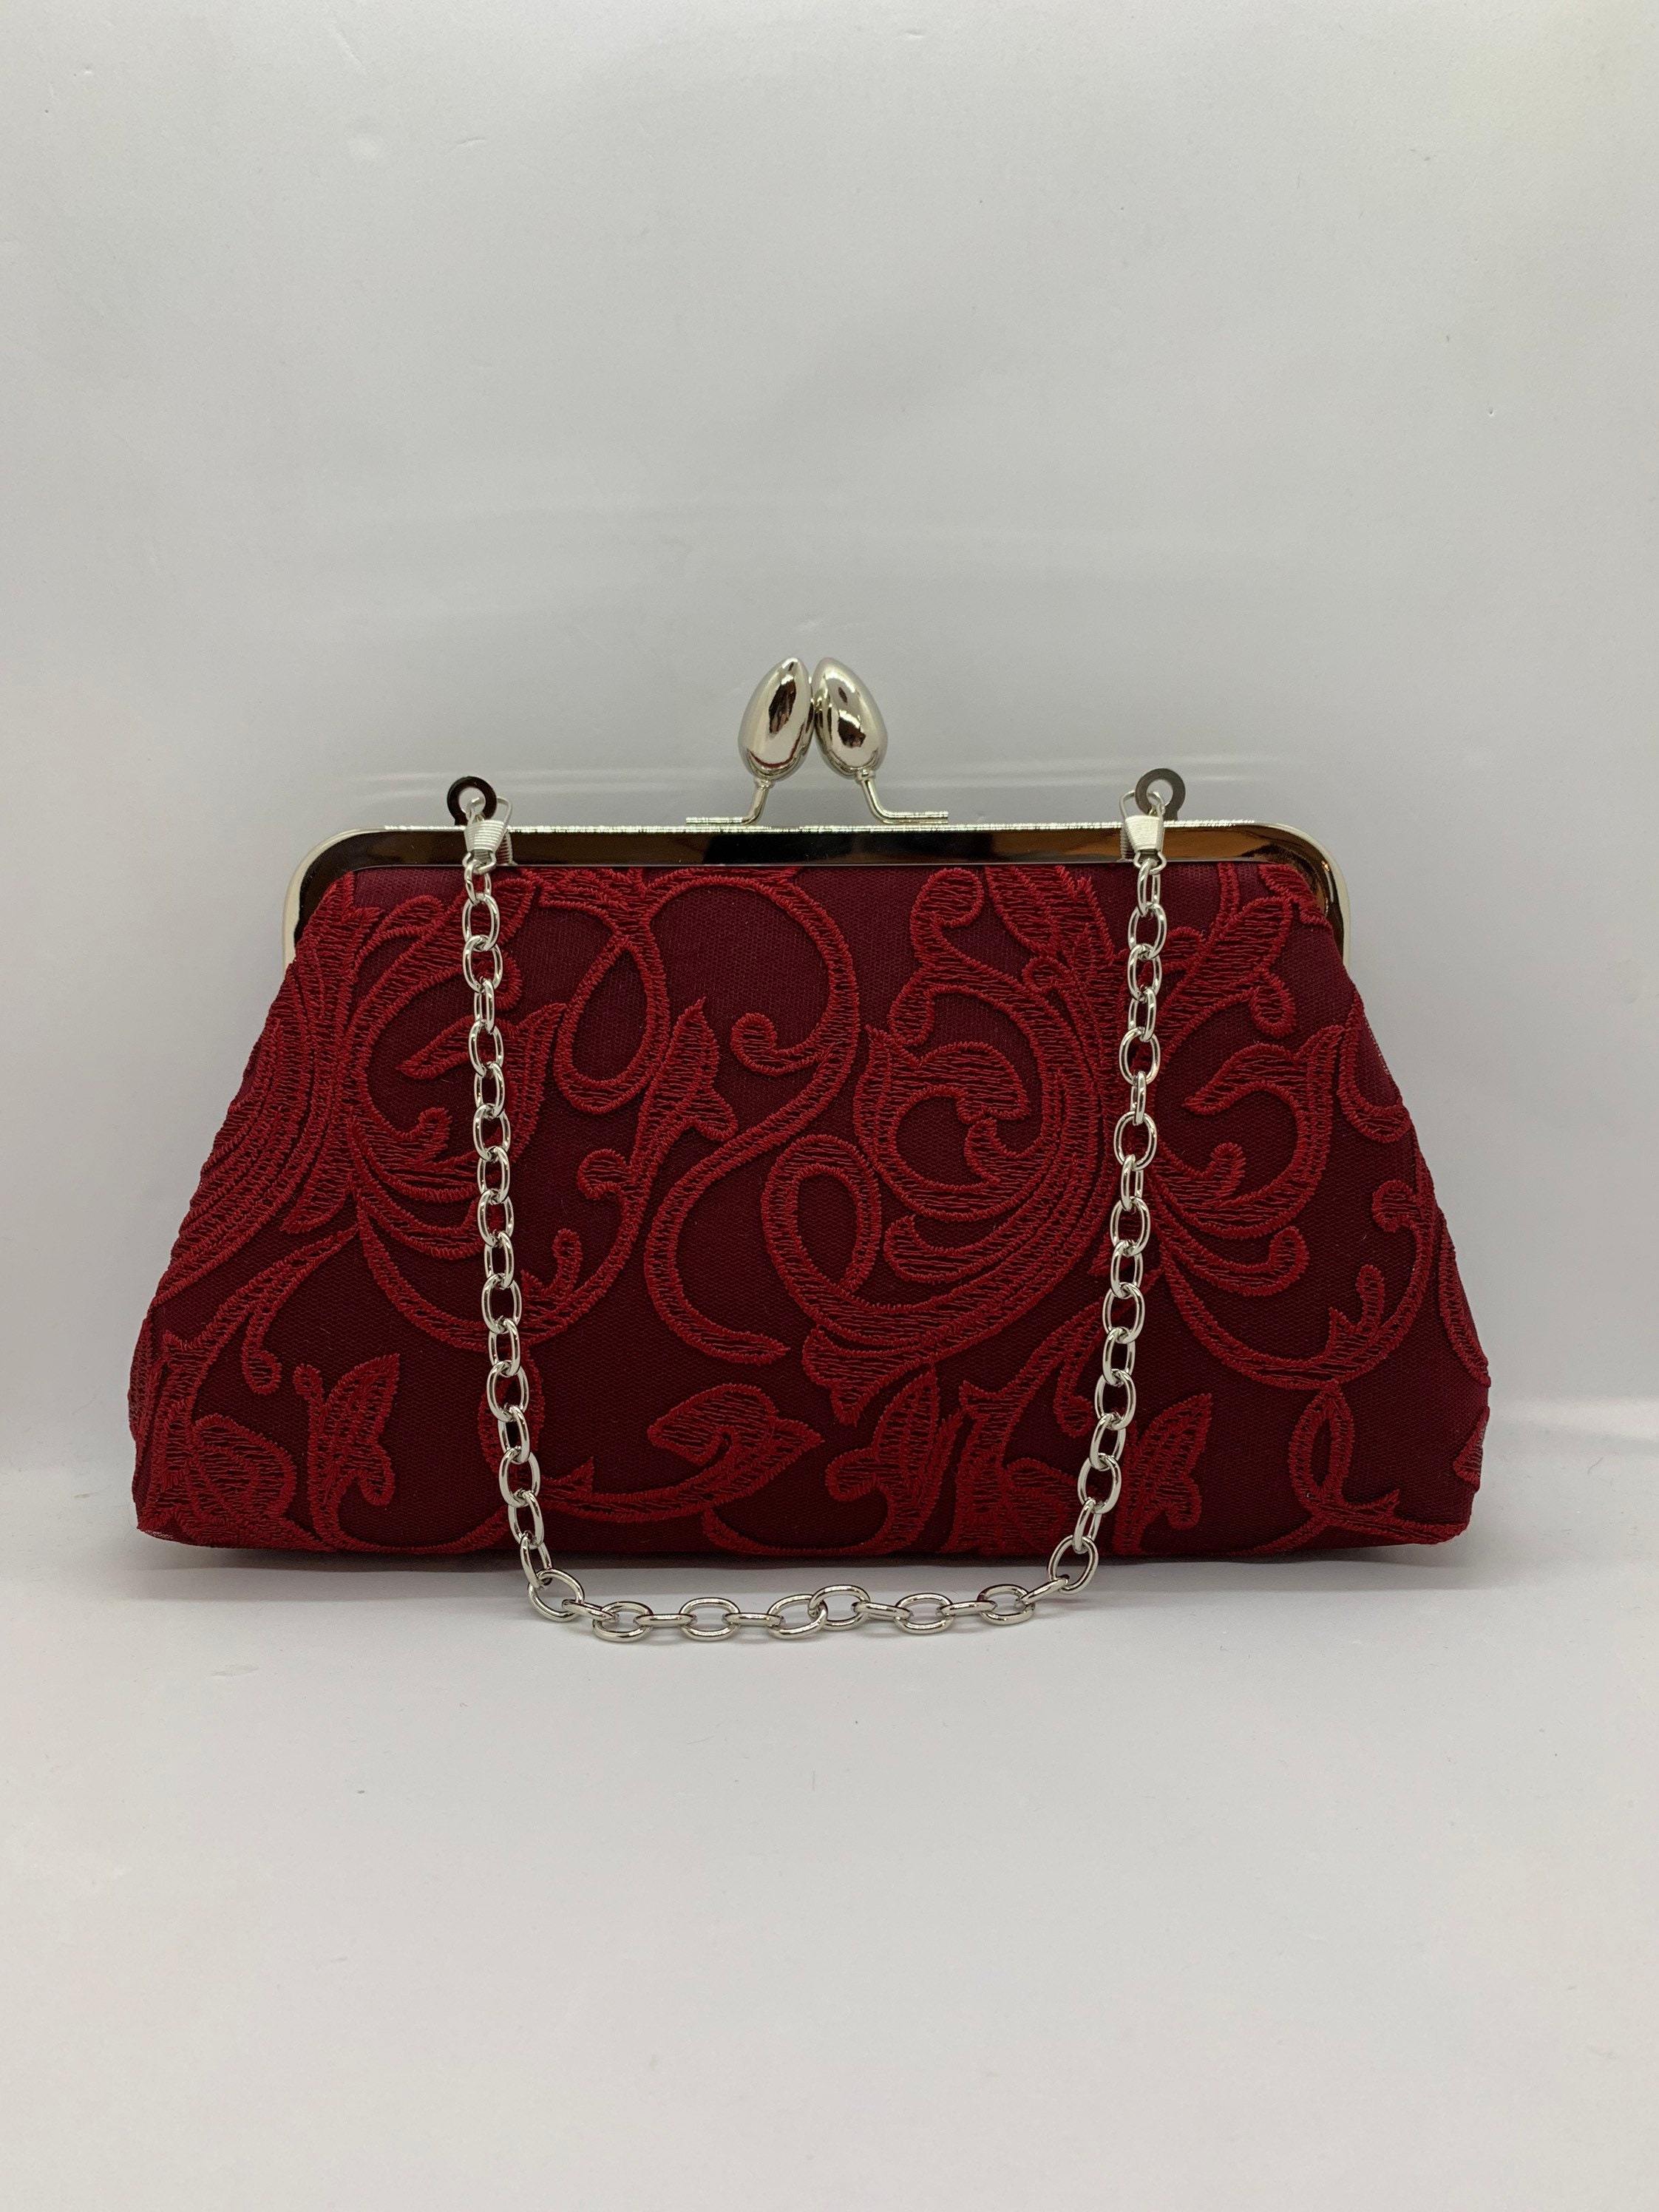 Burgundy Lace Clutch Purse Evening Bag Formal Event Gift for 